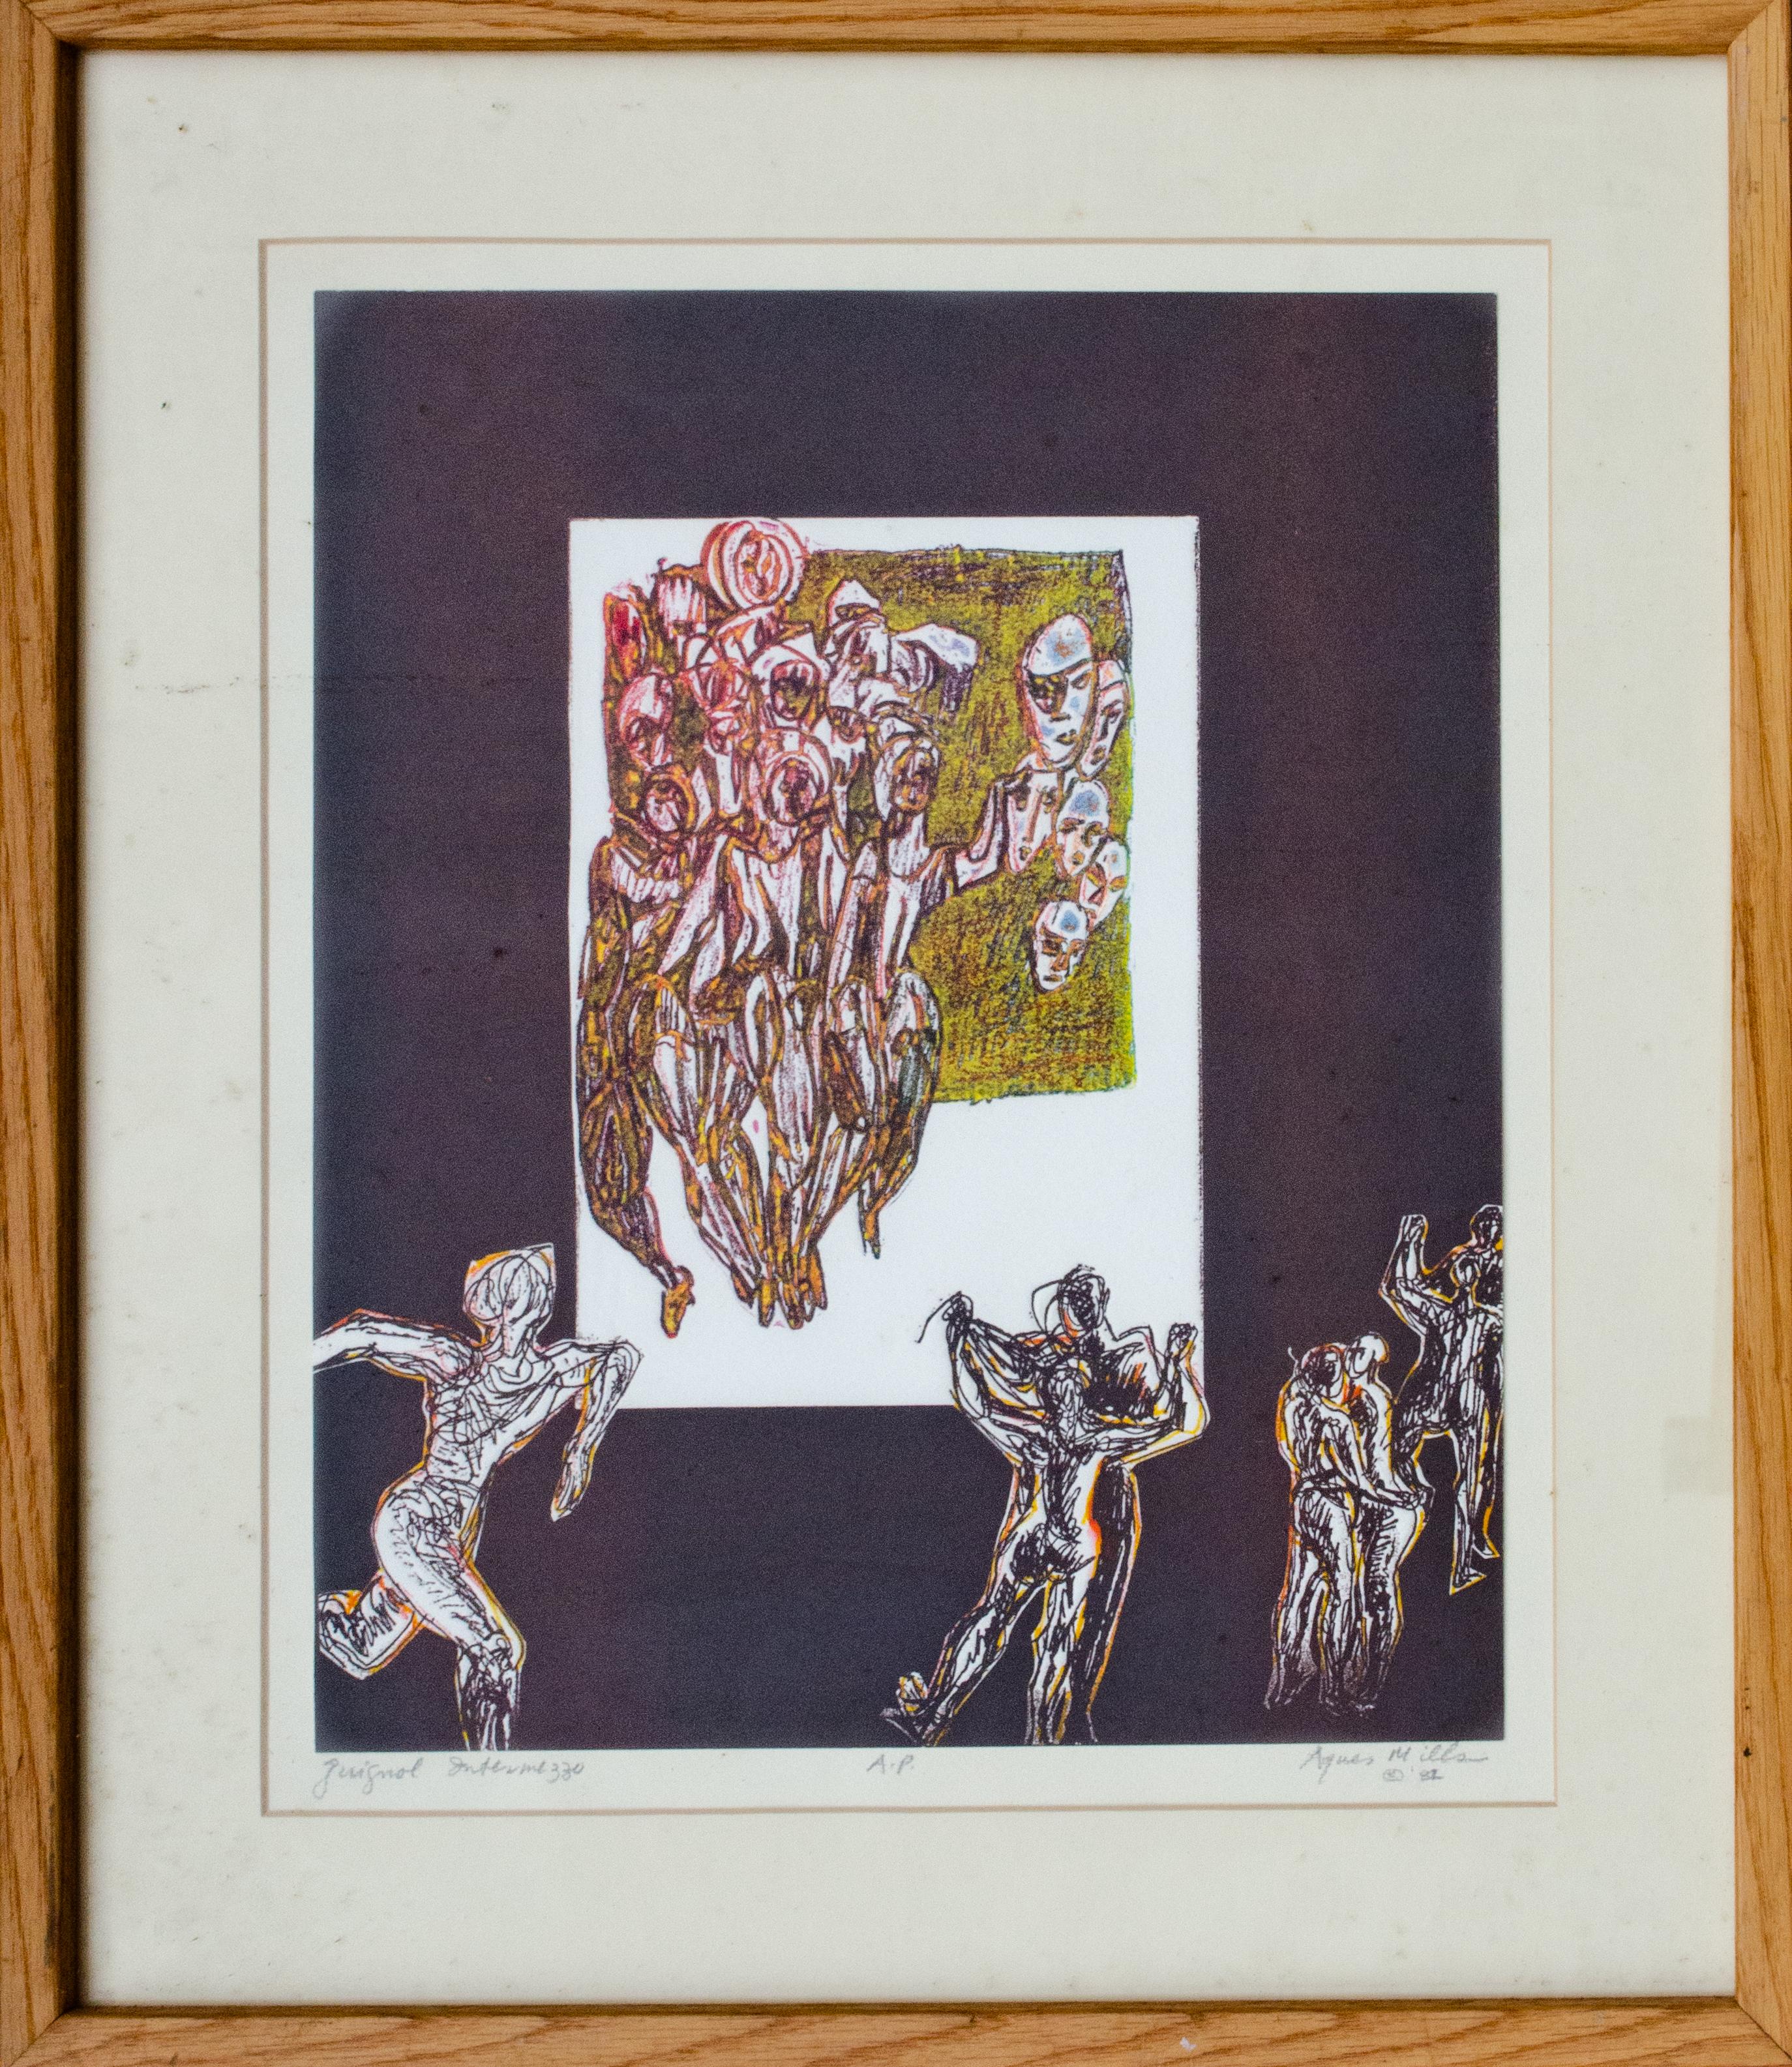 Agnes Mills (American, 1915-2008)
Guignol Intermezzo, 1982
Hand colored etching (UNIQUE)
Sight: 13 3/4 x 11 1/4 in.
Framed: 19 1/2 x 17 x 3/4 in.
Titled lower right
Inscribed "AP" bottom
Signed and dated lower right
As one of the youngest and